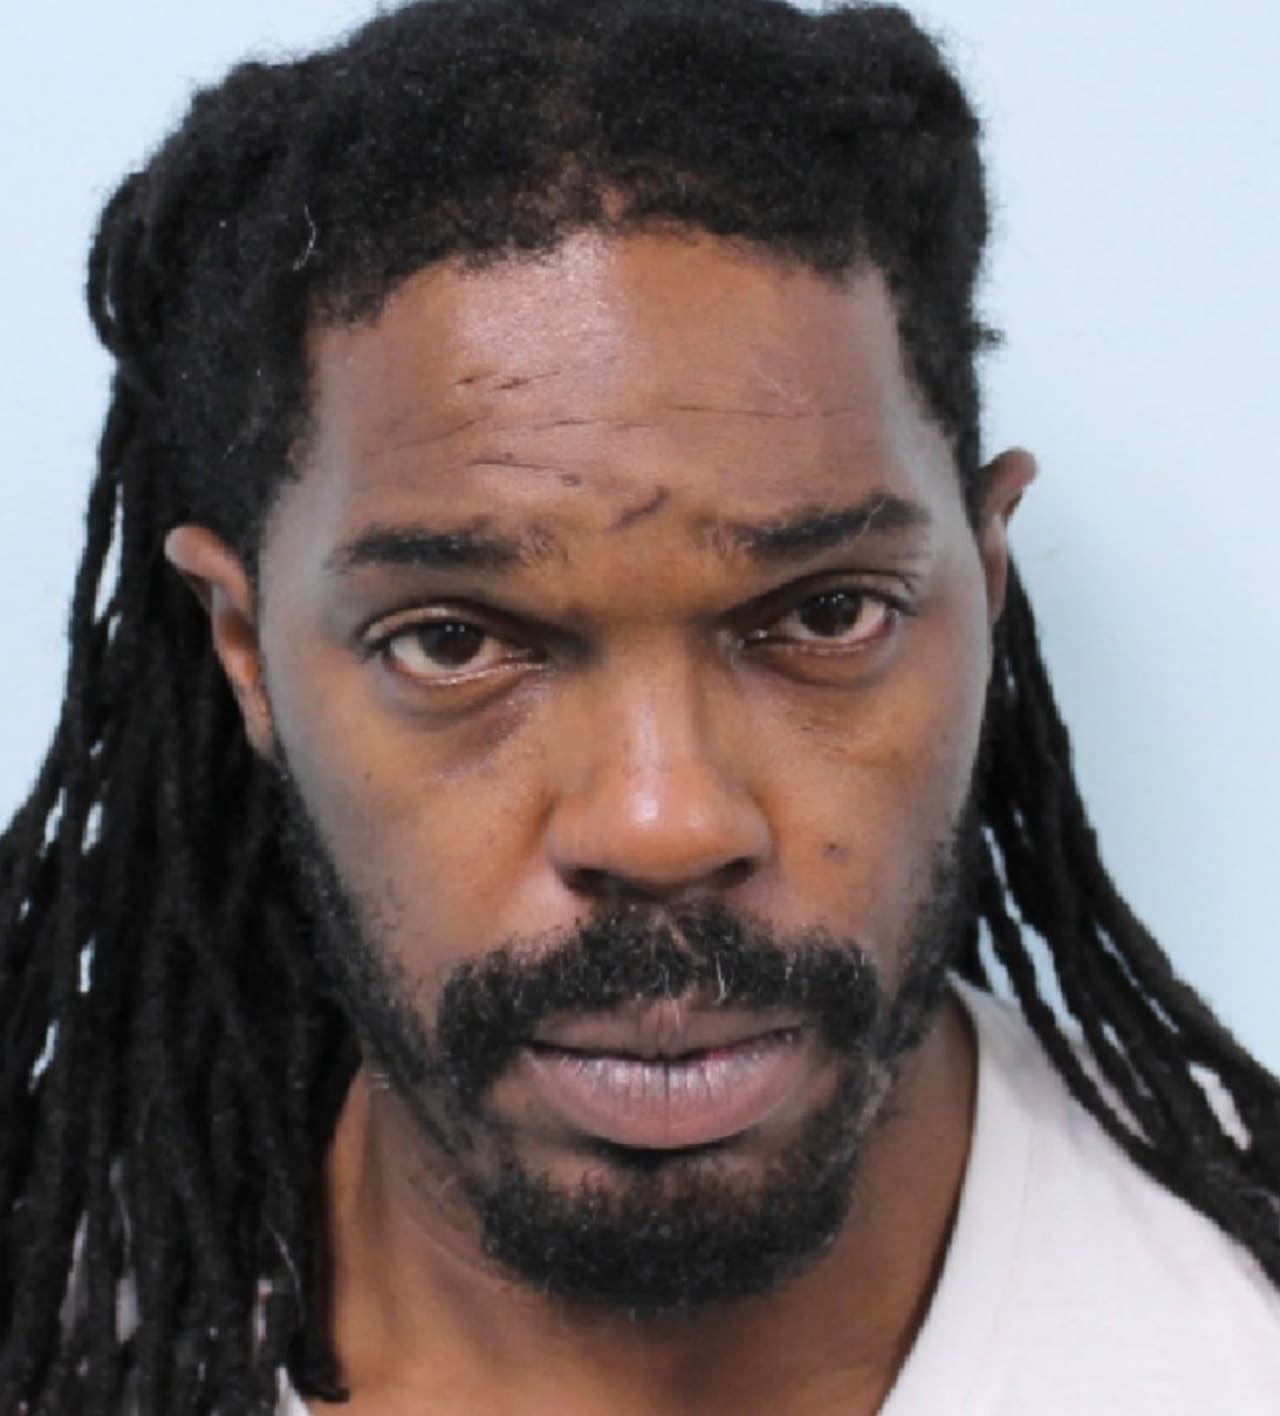 Titus Crews of Springfield (pictured here) is accused of strangling a woman in an effort to steal her purse.